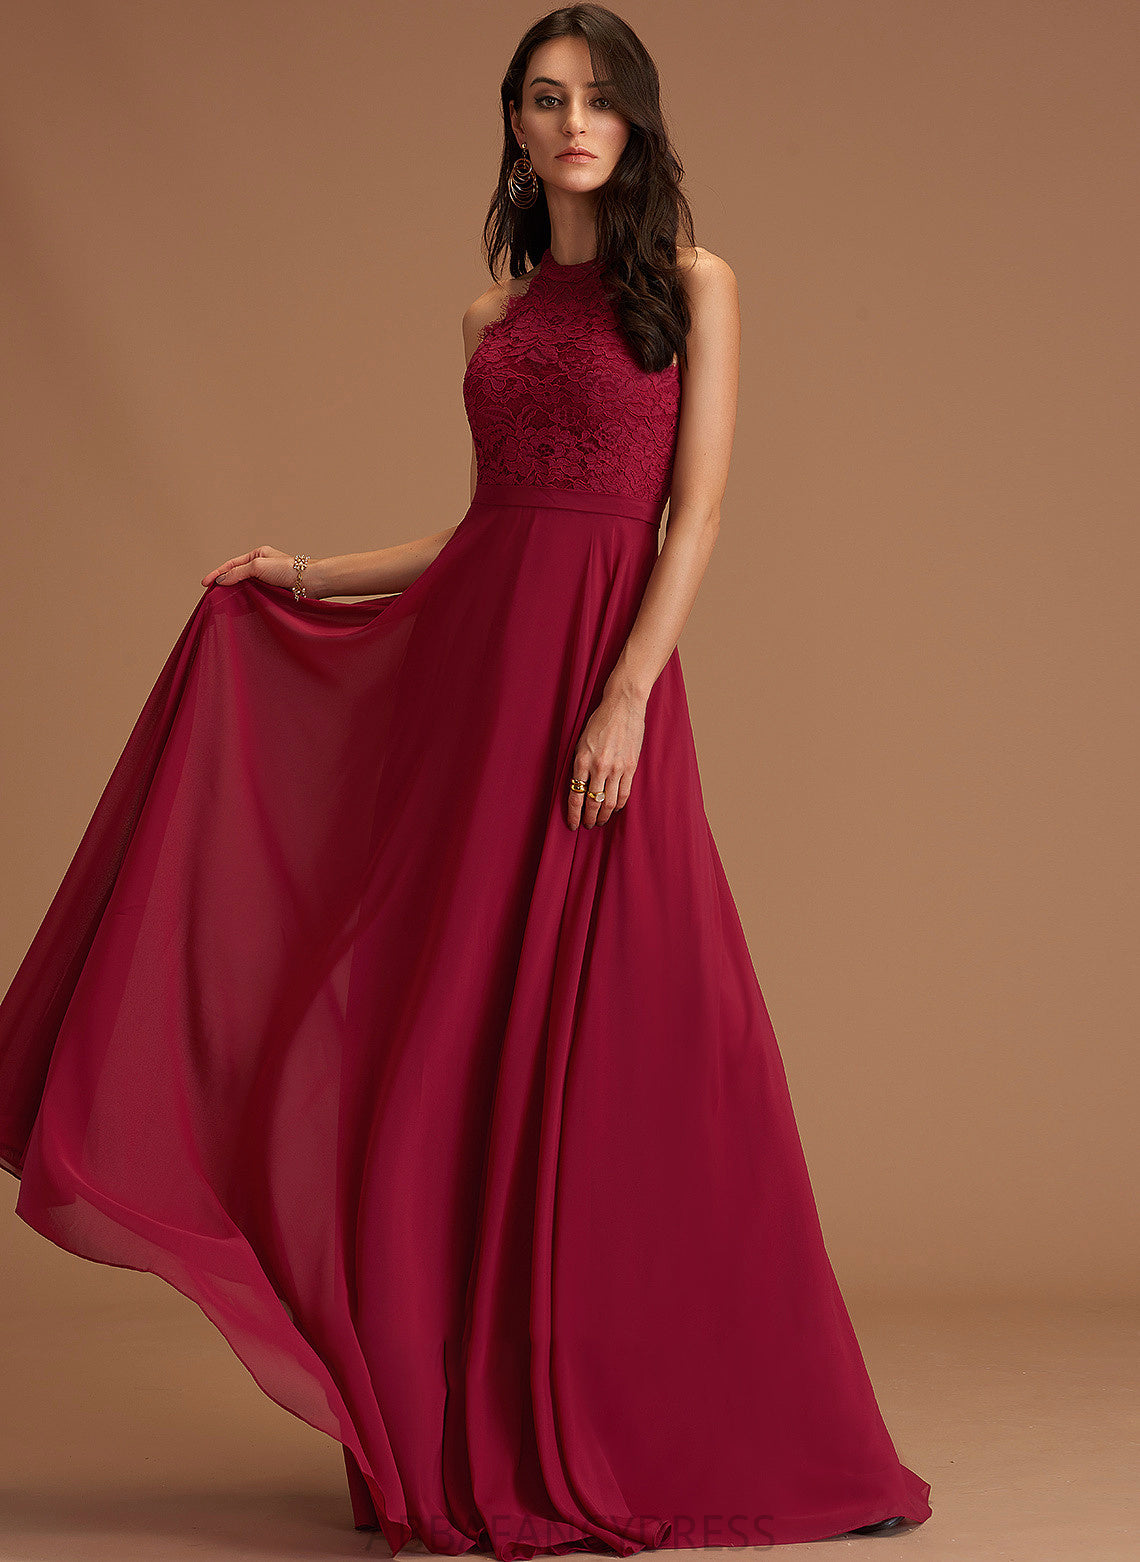 Scoop With Lace Chiffon A-Line Floor-Length Prom Dresses Zara Neck